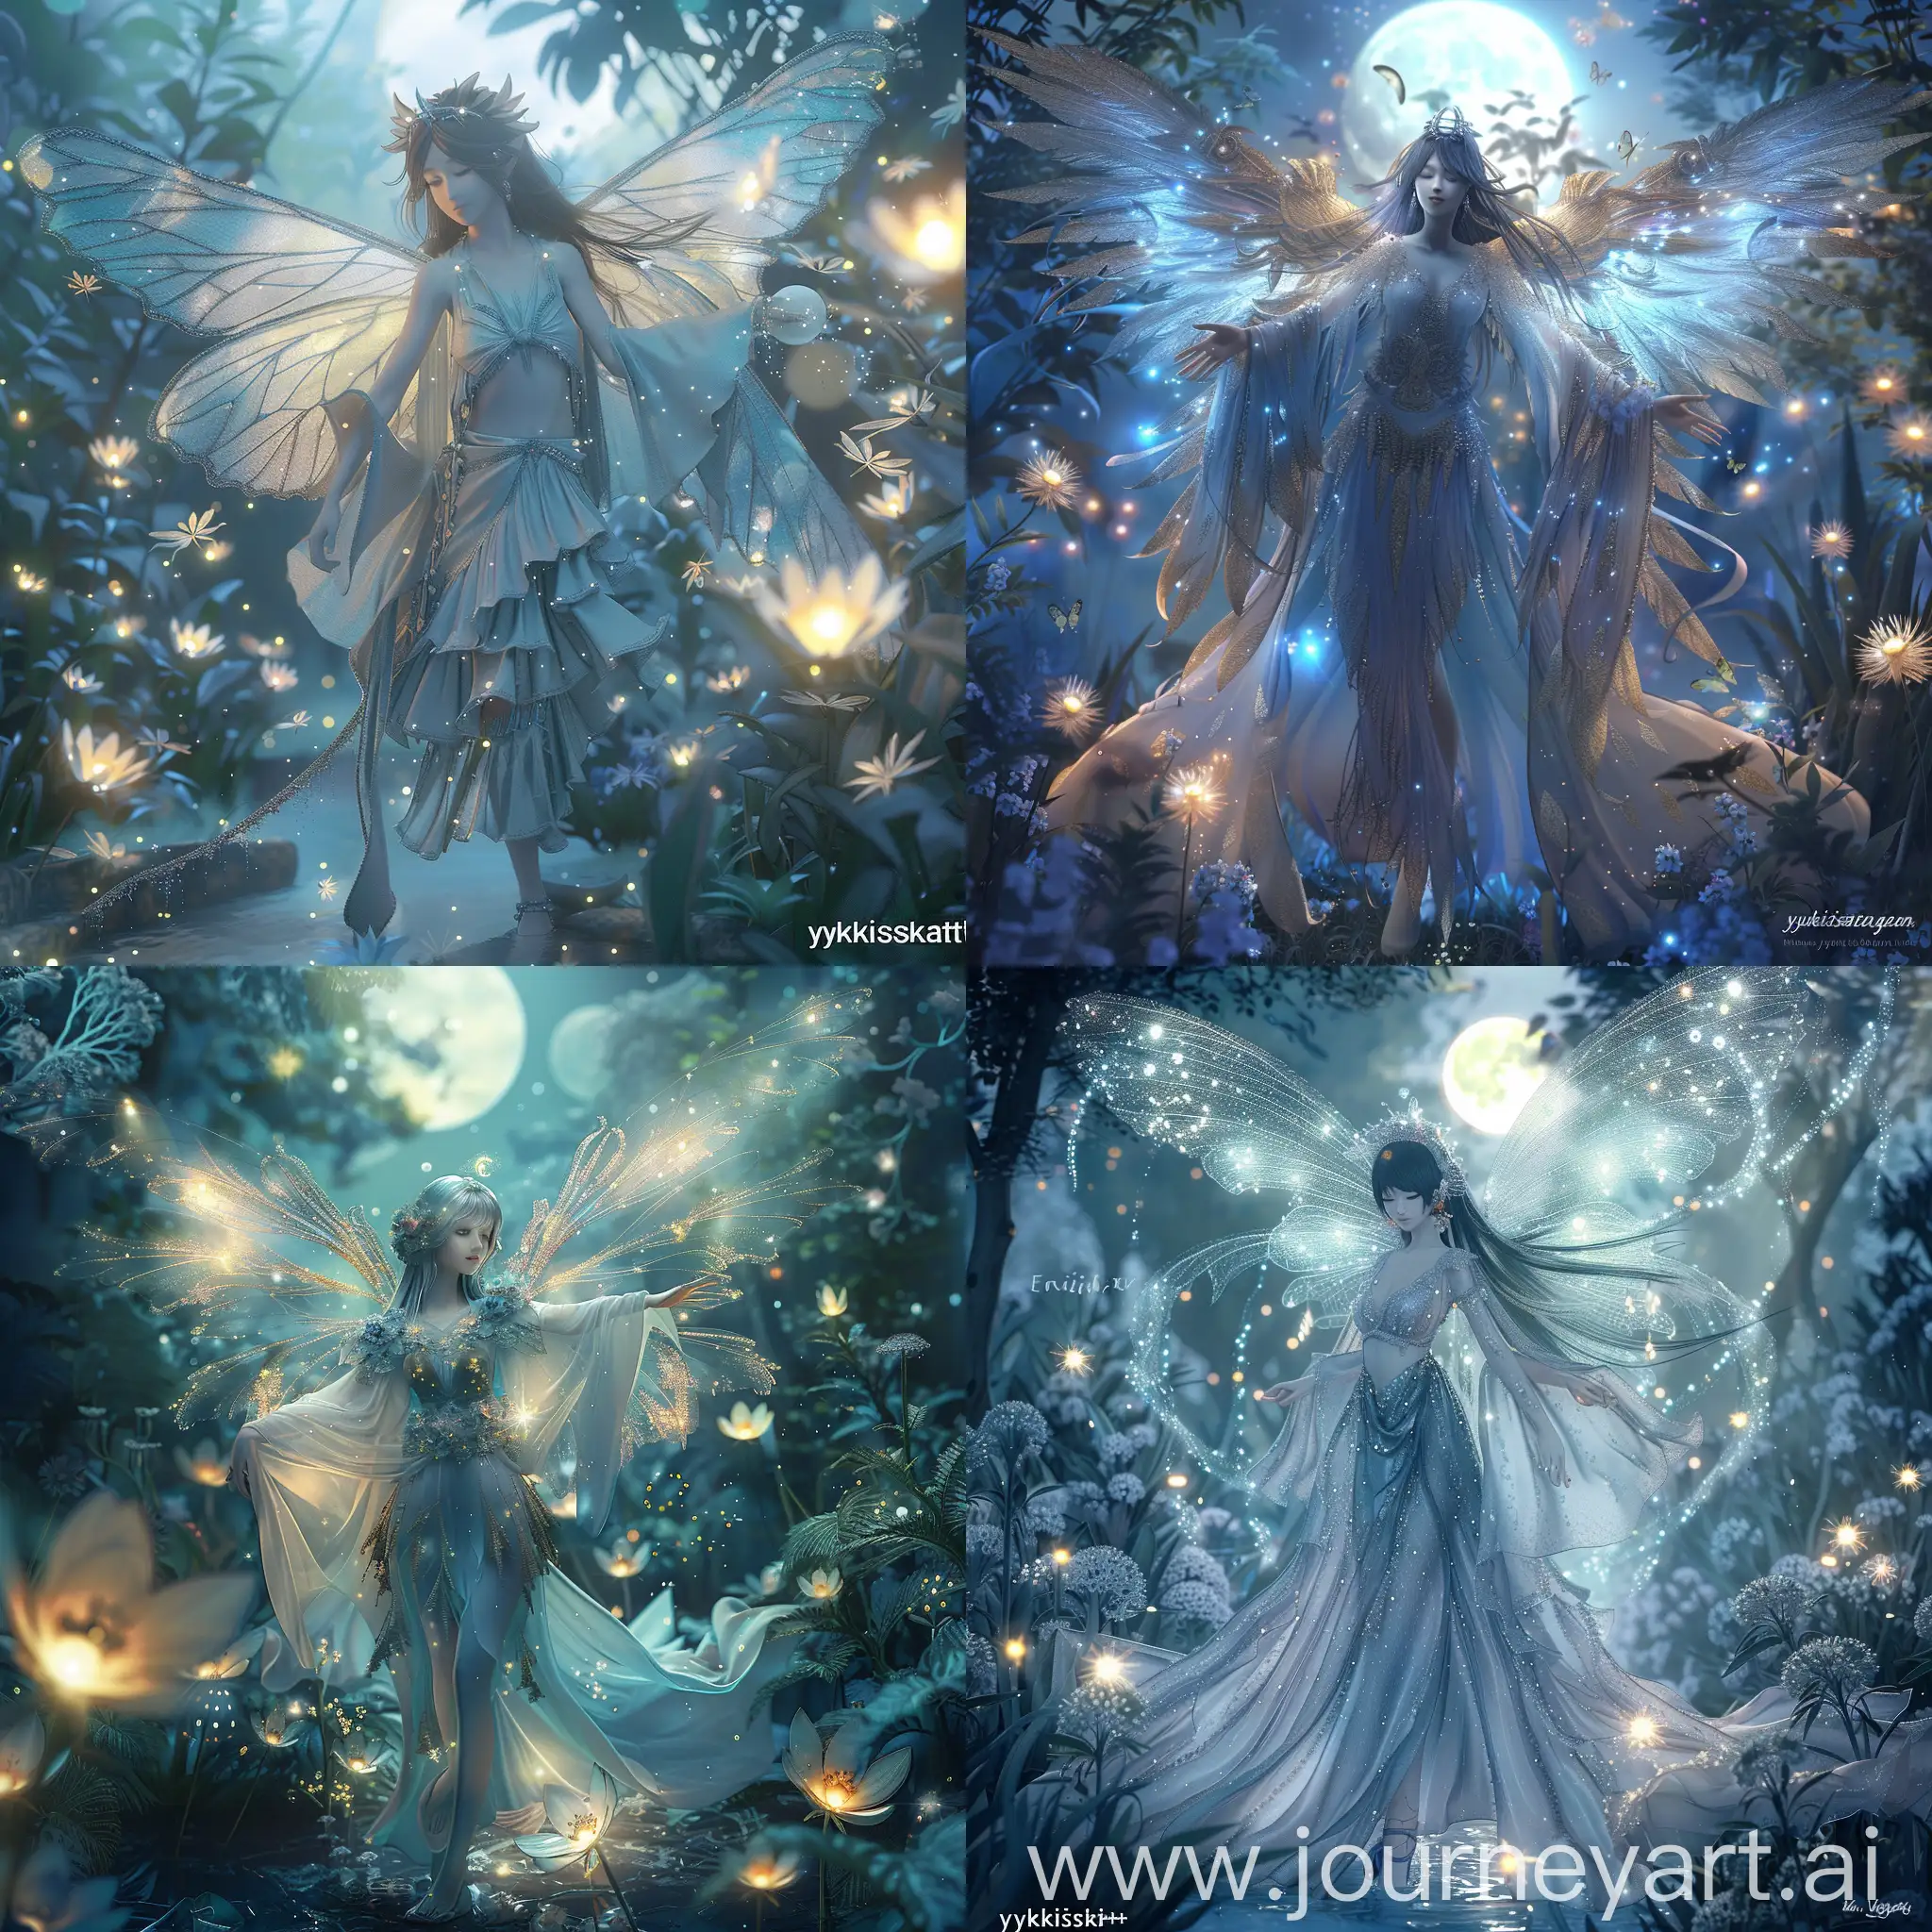 high quality, 8K Ultra HD, Enchanted Moonlit Garden, In the heart of the garden stands a beautiful graceful fairy-like figure, adorned in delicate, flowing garments that shimmer with starlight, Her wings glisten with moonbeams as she spreads a sense of wonder and tranquility, Step into a realm of enchantment with this mesmerizing digital artwork, The scene unfolds in a moonlit garden filled with ethereal beauty, Glowing moonflowers and luminescent fireflies create an otherworldly glow, casting a magical ambiance over the scene, The color palette is a delicate mix of cool blues and soft pastels, by yukisakura, highly detailed, 